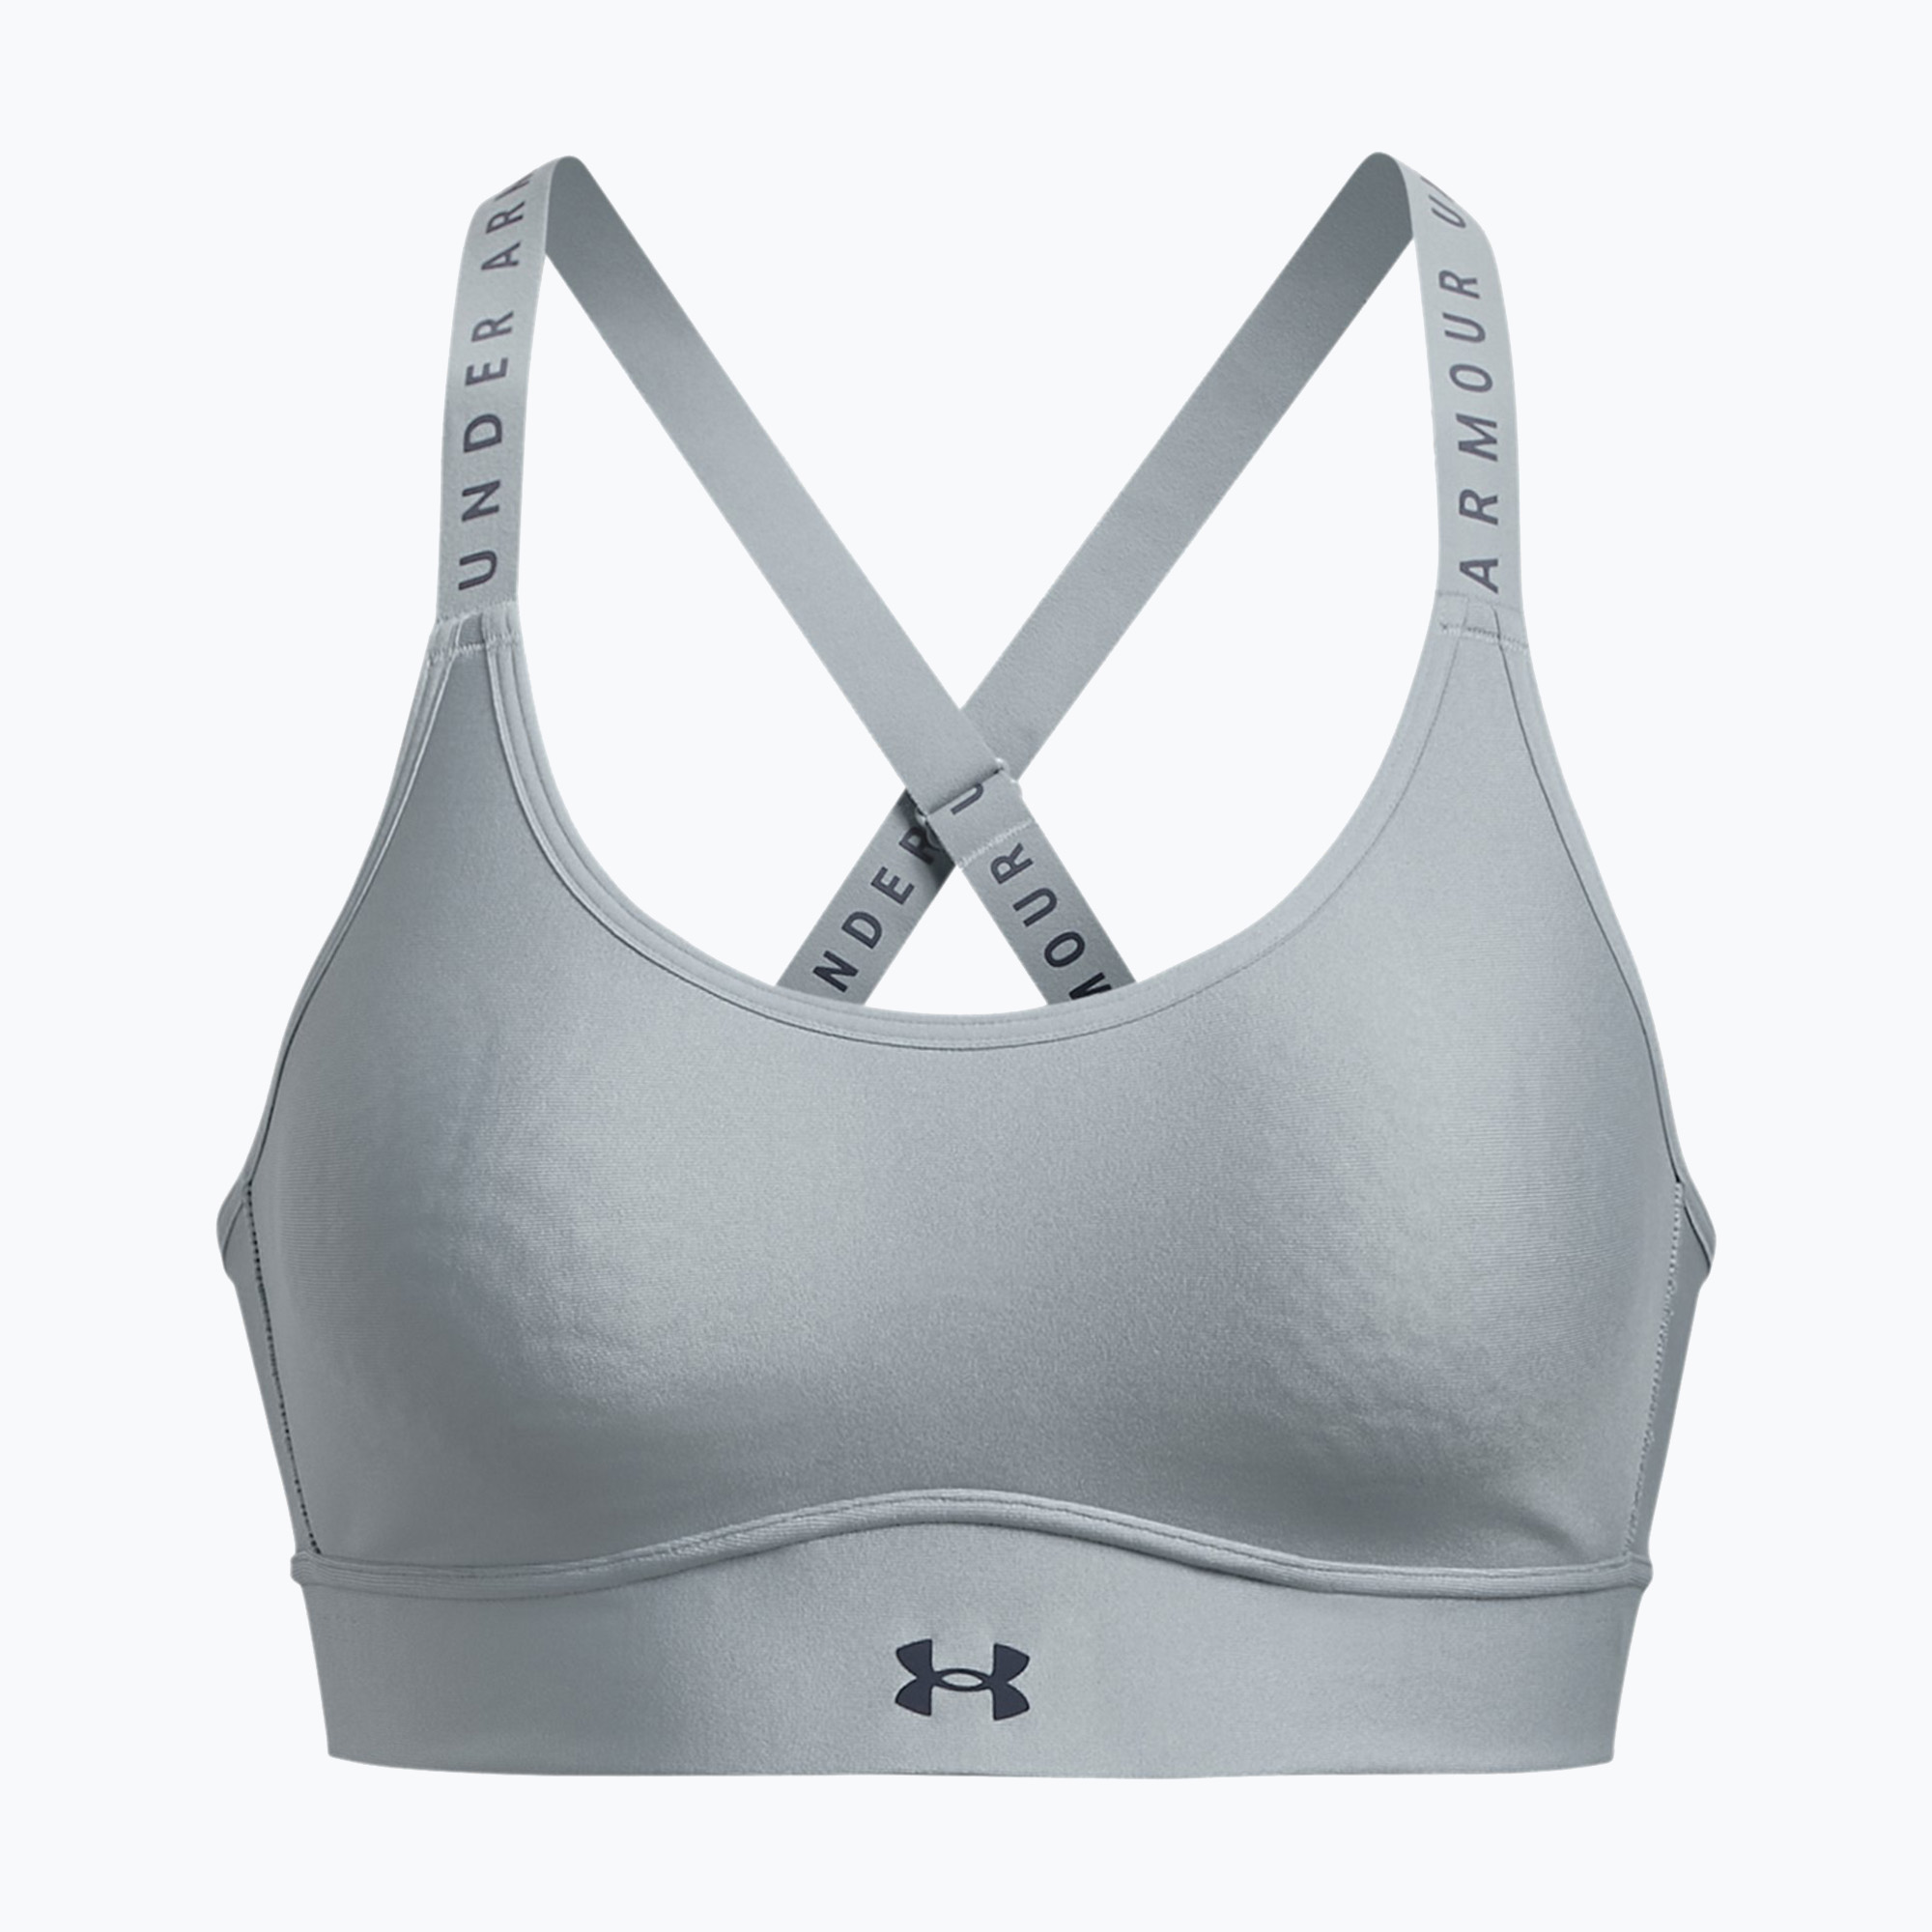 Sutien de fitness Under Armour Infinity Covered Mid gri 1363353-465